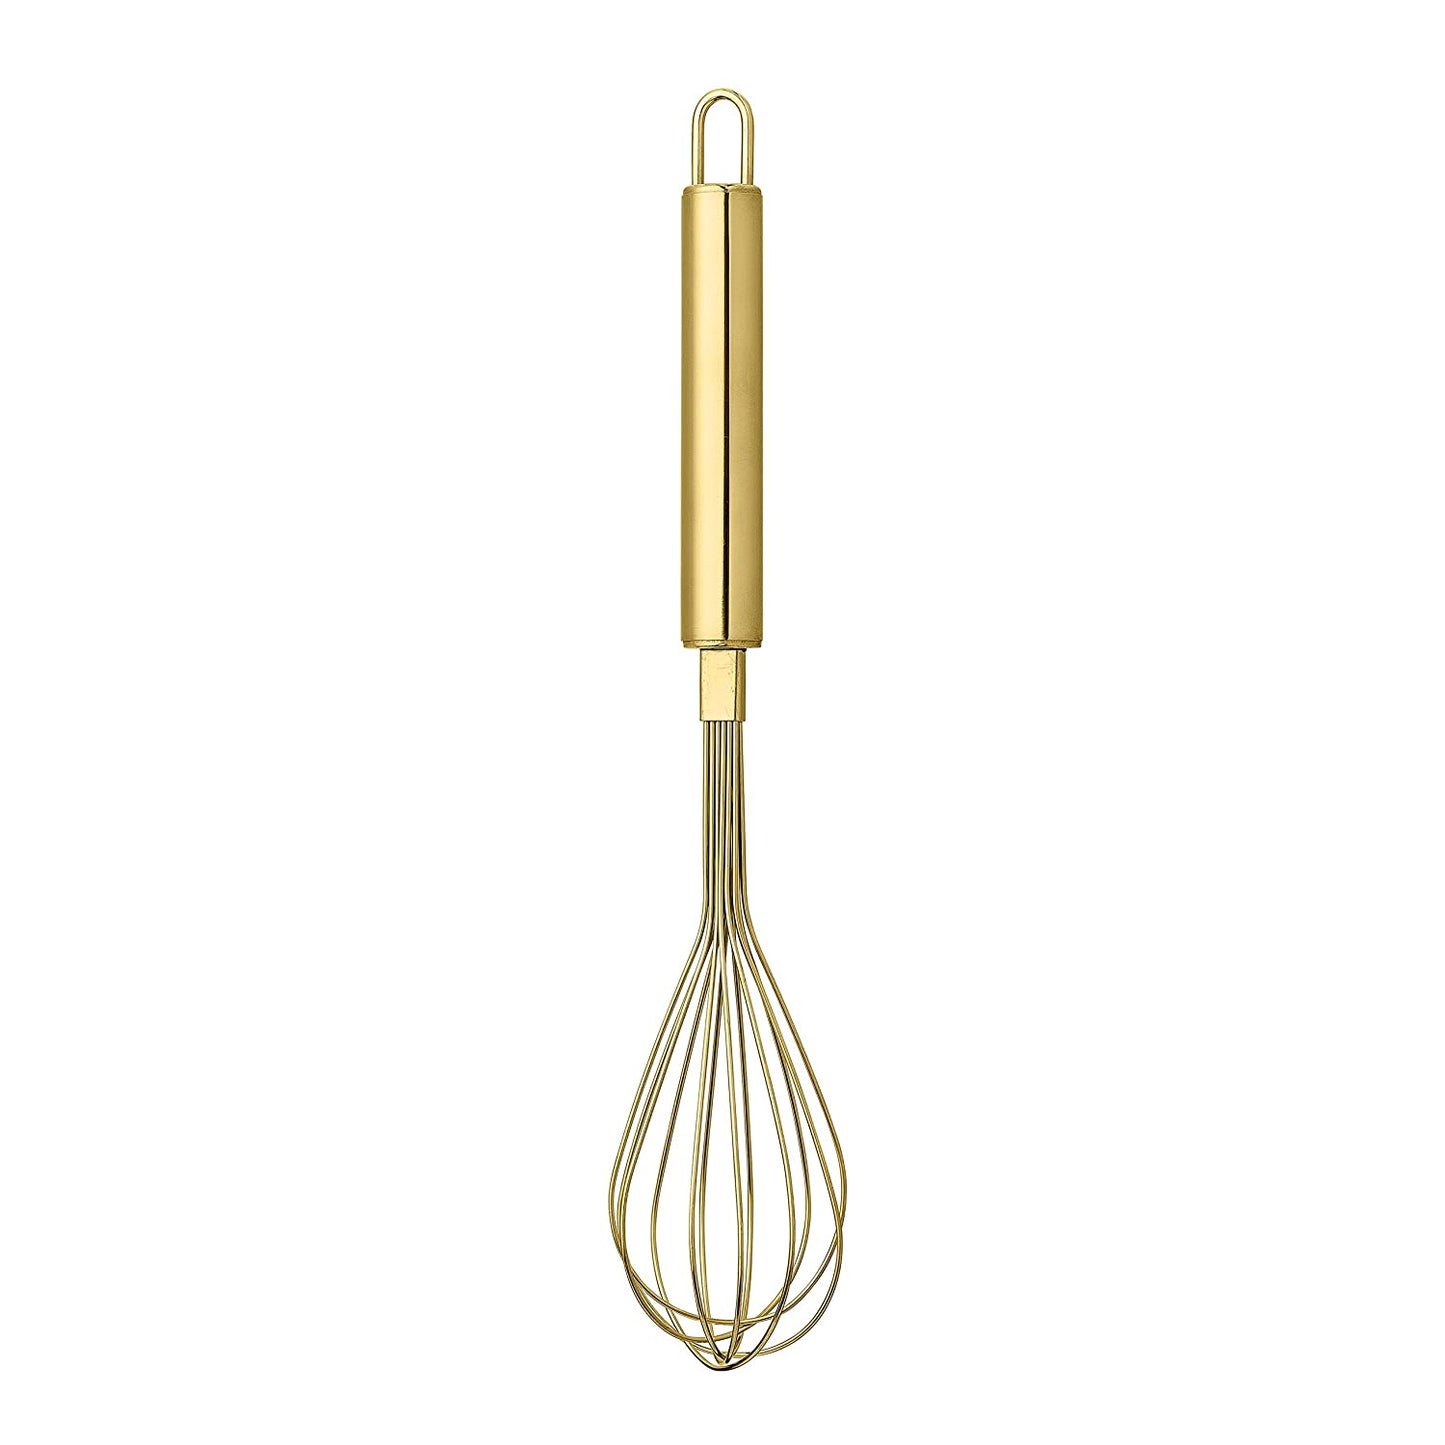 Stainless Steel Whisk, Gold Finish 12-1/4"L